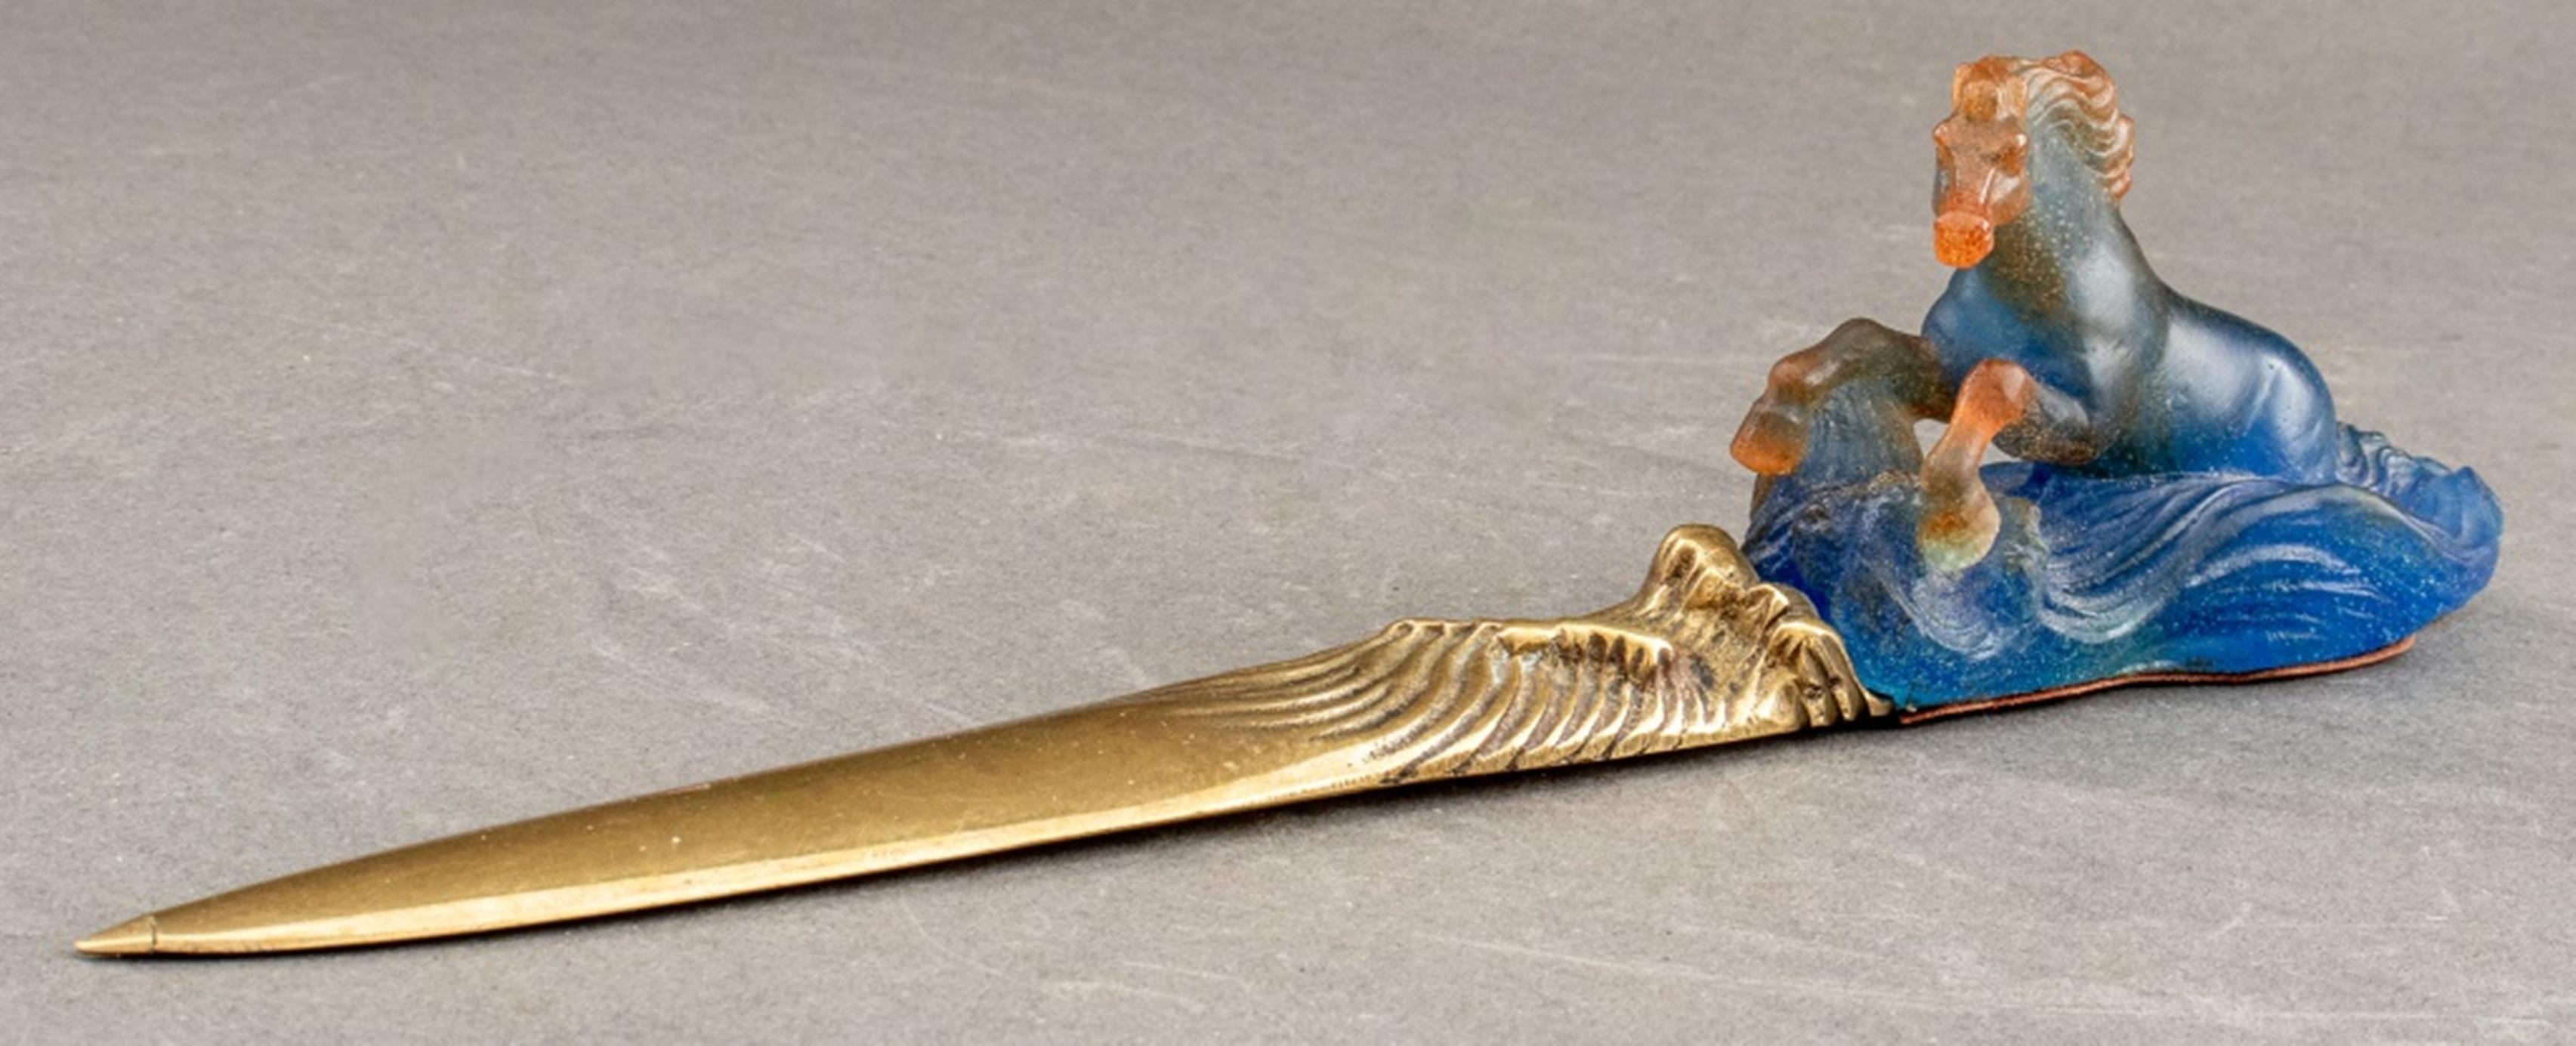 Daum letter knife, the blue and orange pate de verre glass handle in the form of a merhorse emerging from the sea, the blade of gilt bronze.

Dimensions: 11.25